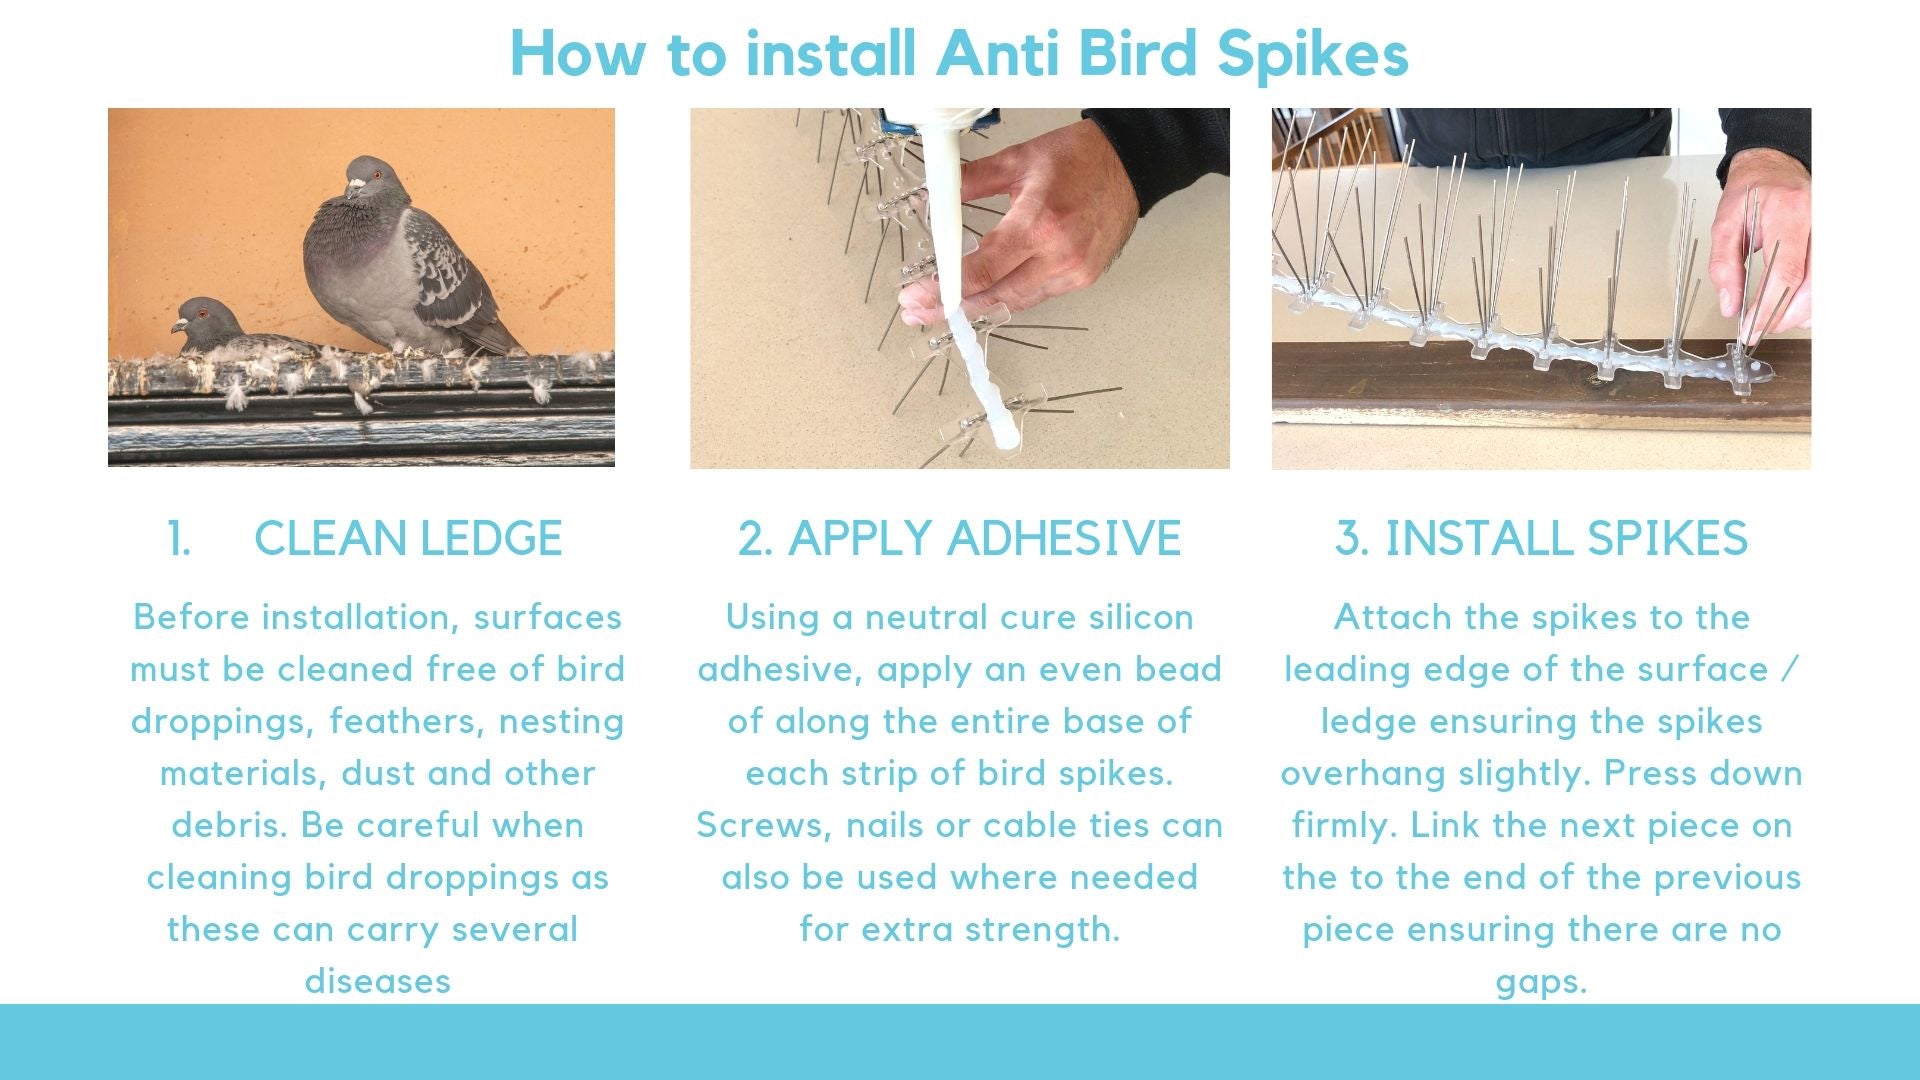 How to install Anti Bird Spikes